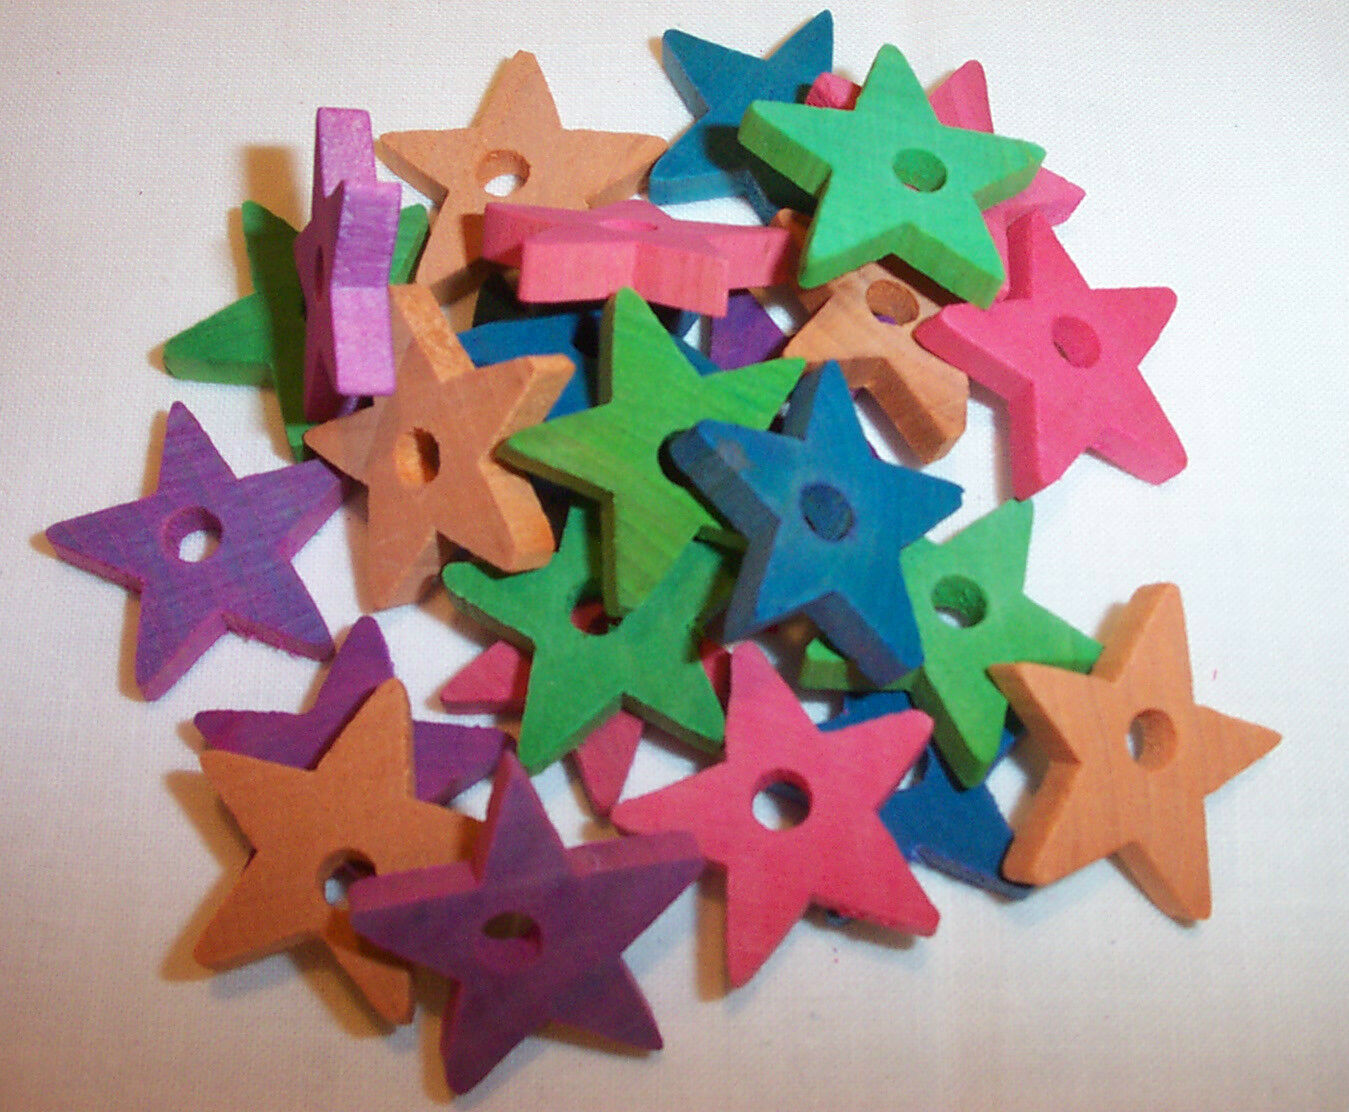 25 Wood 1" Colored Wooden Stars Bird Parrot Toy Craft Beads Parts W/ Hole New